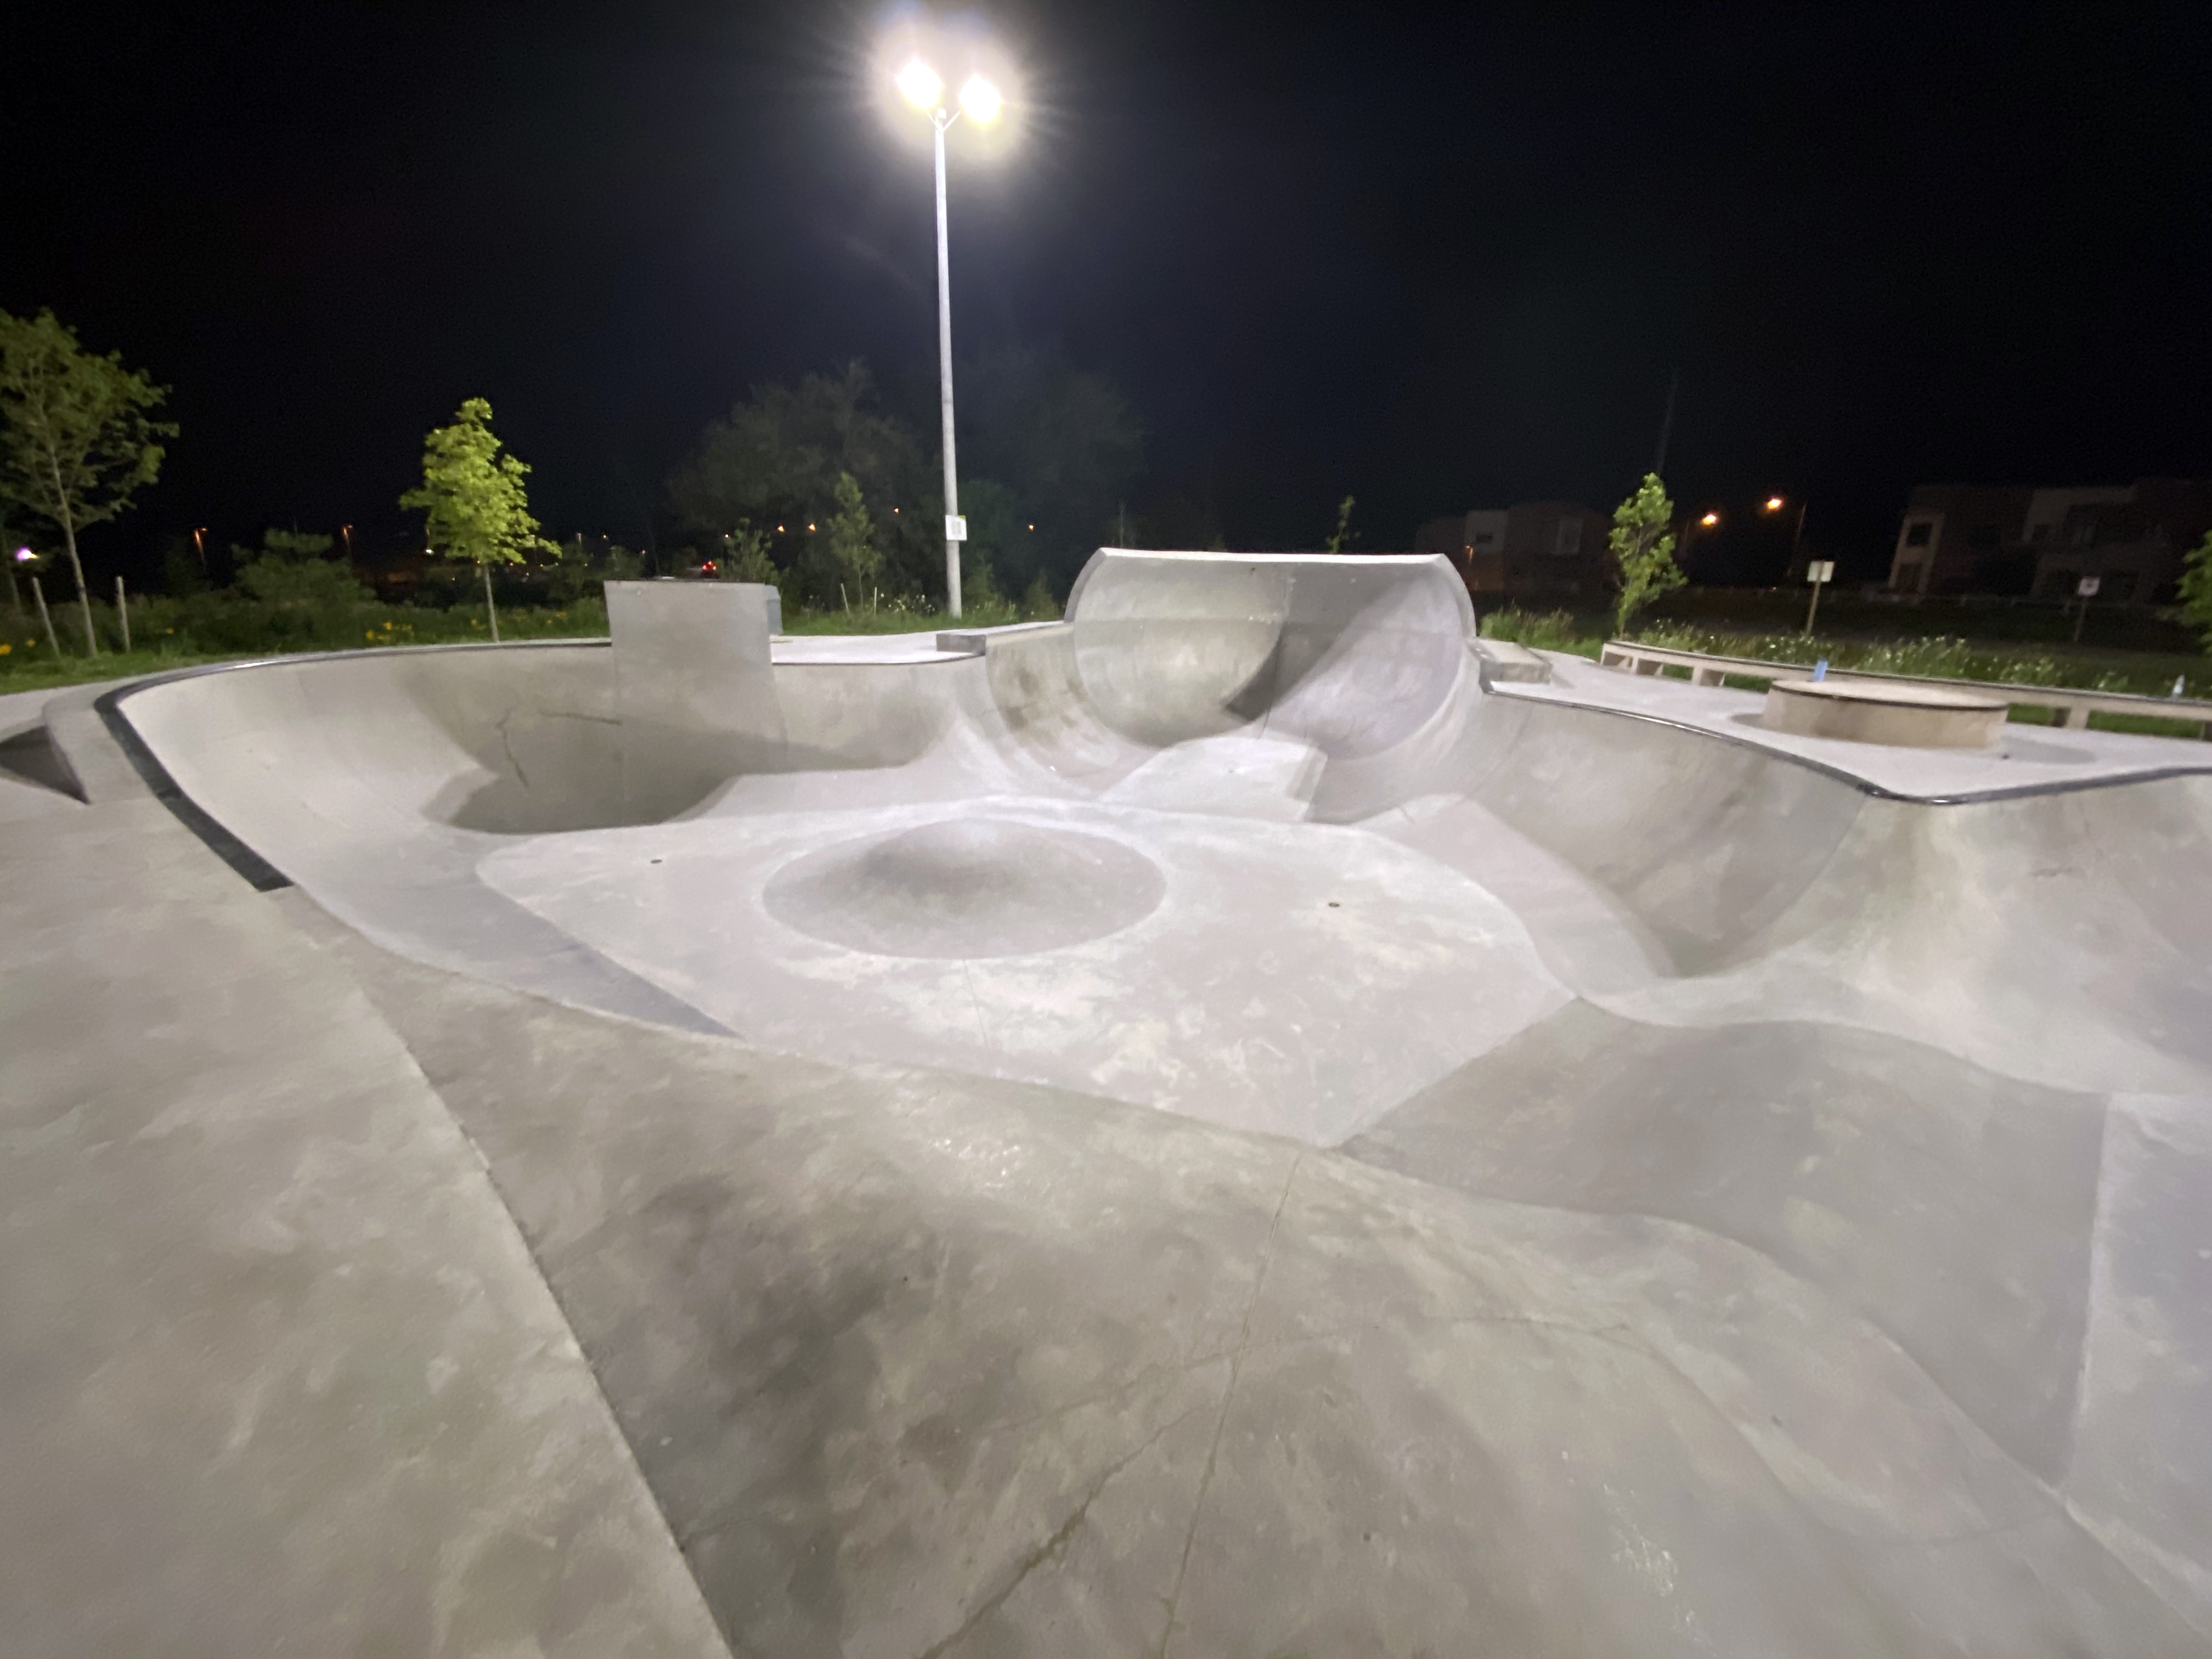 Lake Wilcox bowl at night with lights